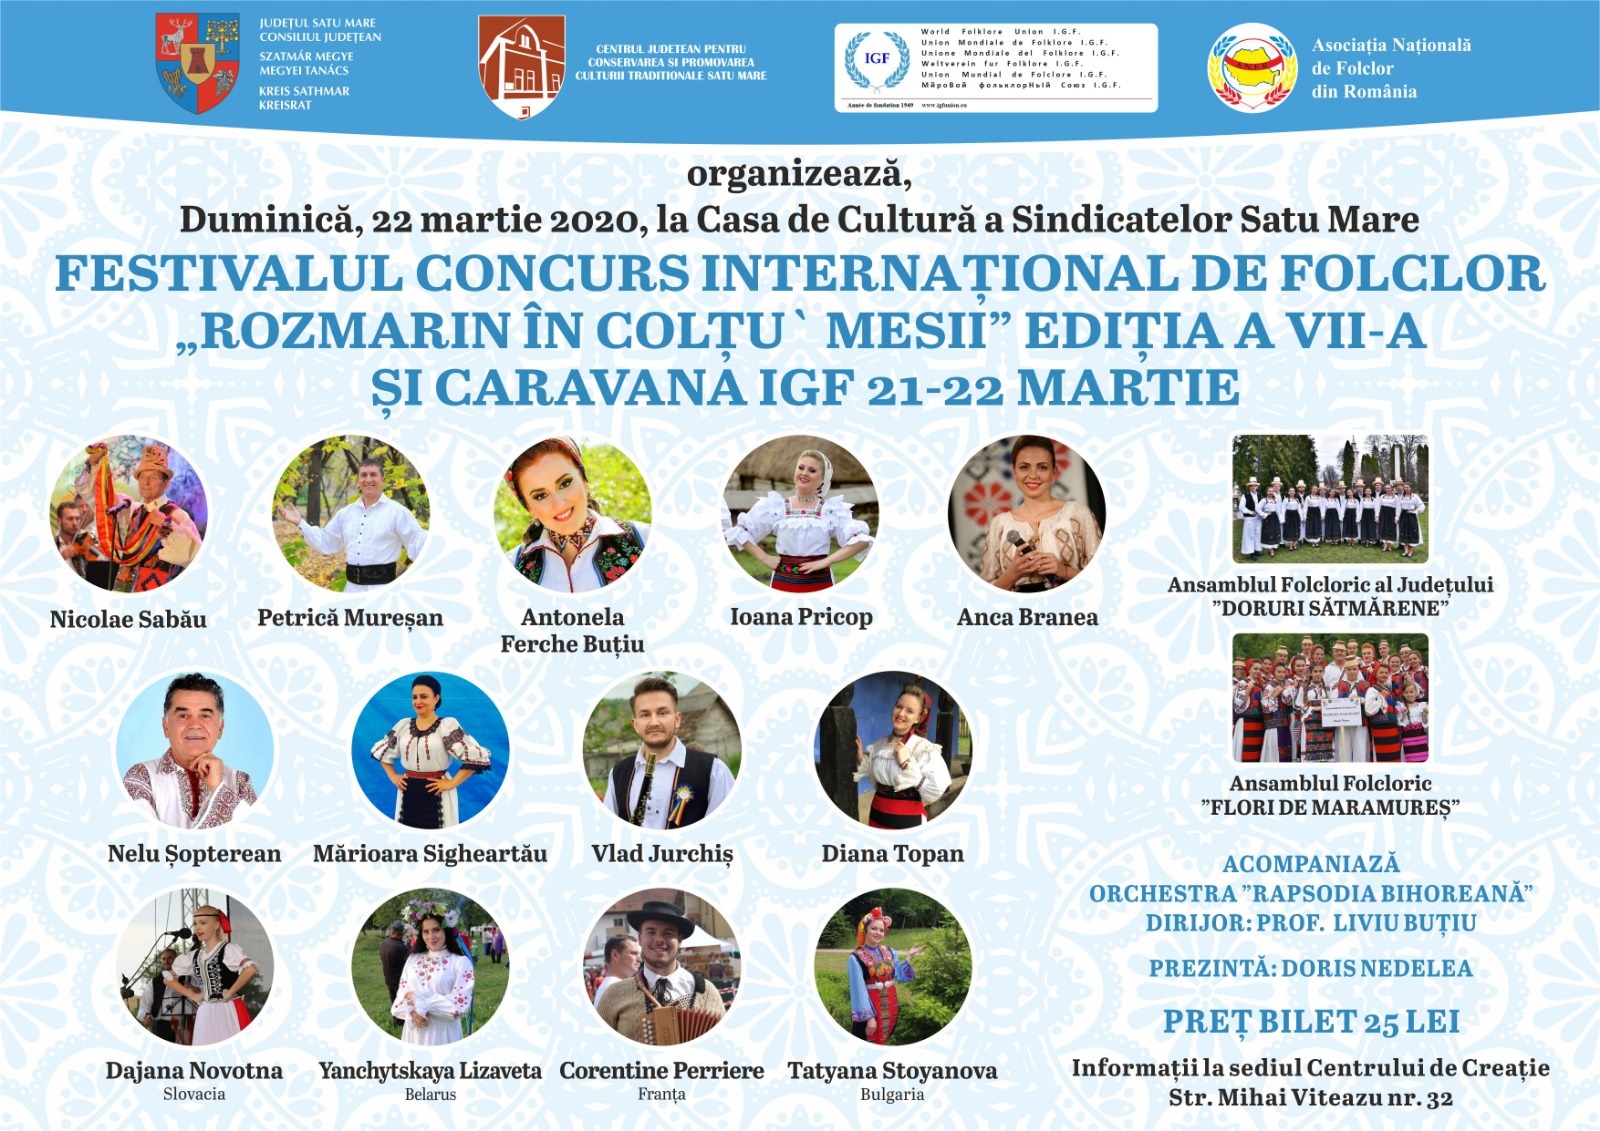 FOR THE FIRST TIME IN THE HISTORY OF SATU MARE COUNTY – ROMANIA, IN MARCH WILL BE HELD THE MEETING OF THE WORLD FOLKLORE UNION (I.G.F.)